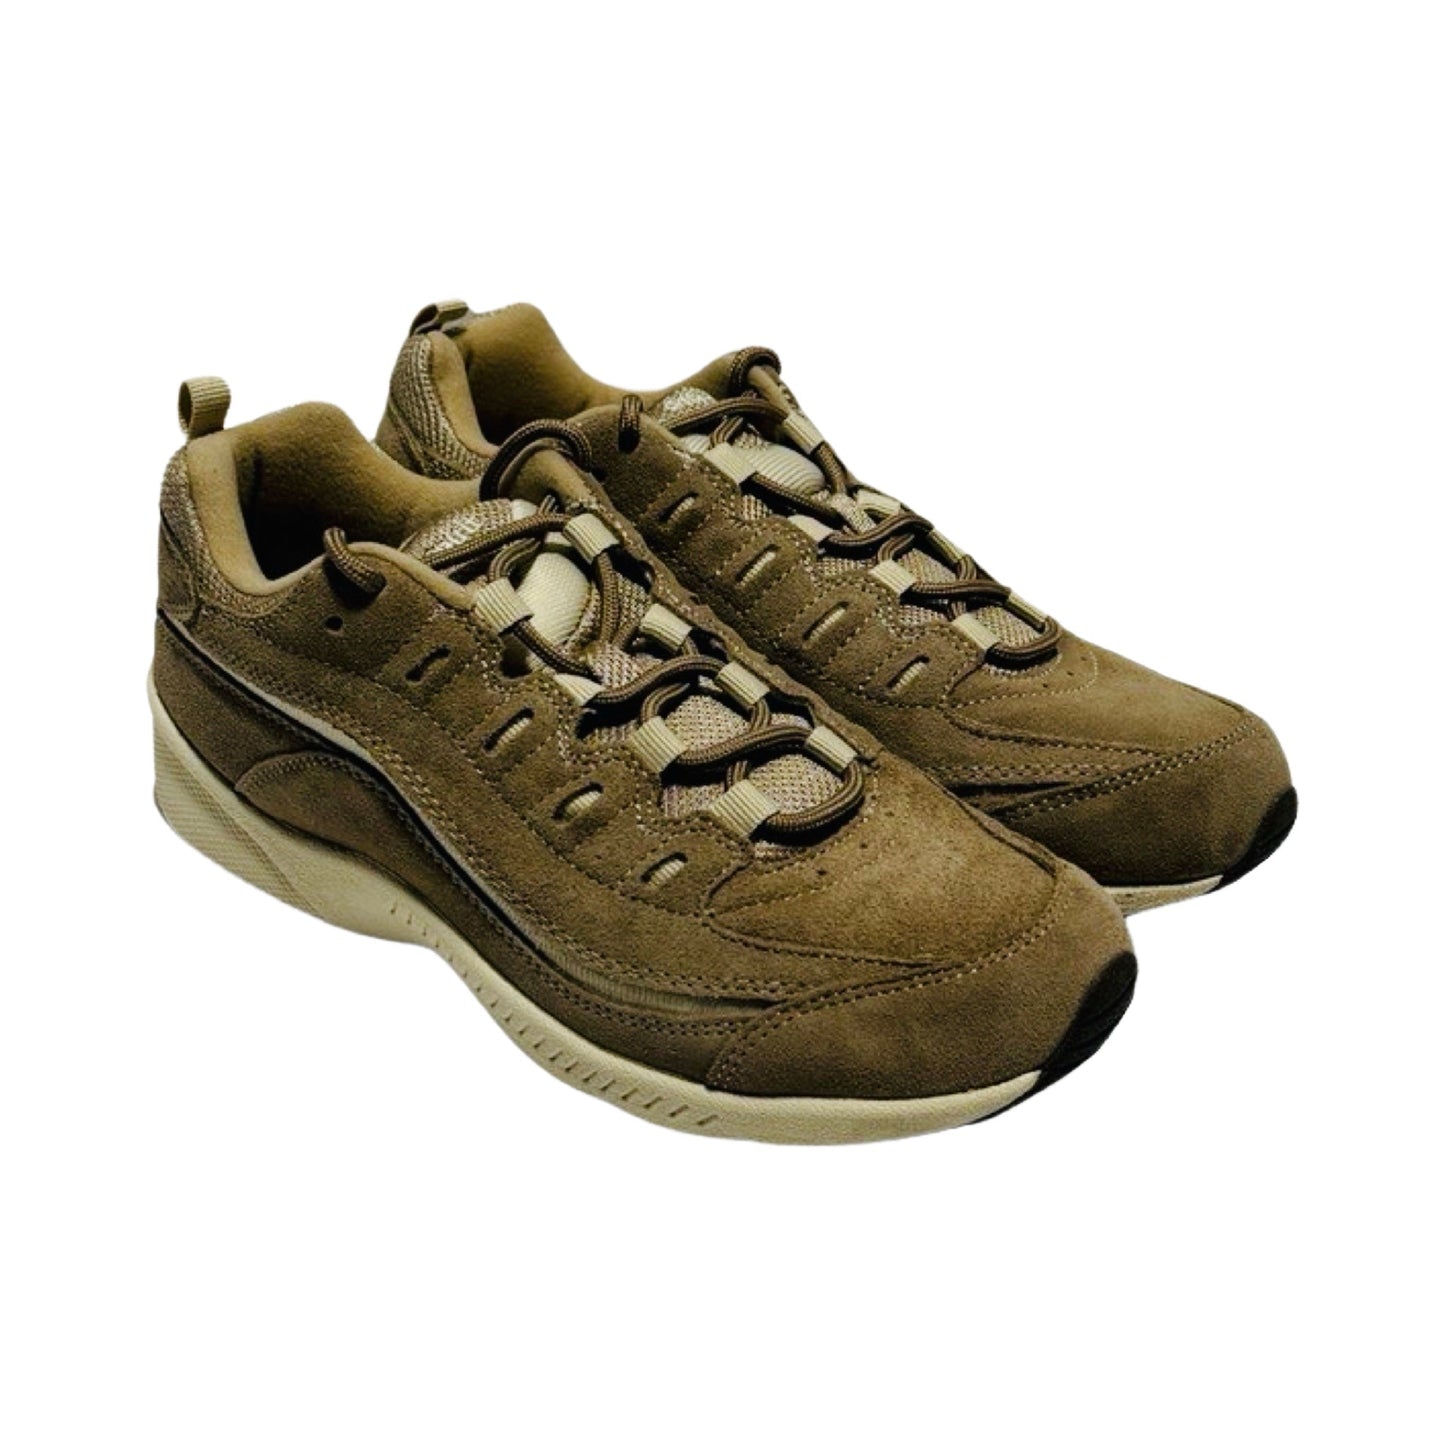 Tan Shoes Sneakers By Easy Spirit  Size: 7